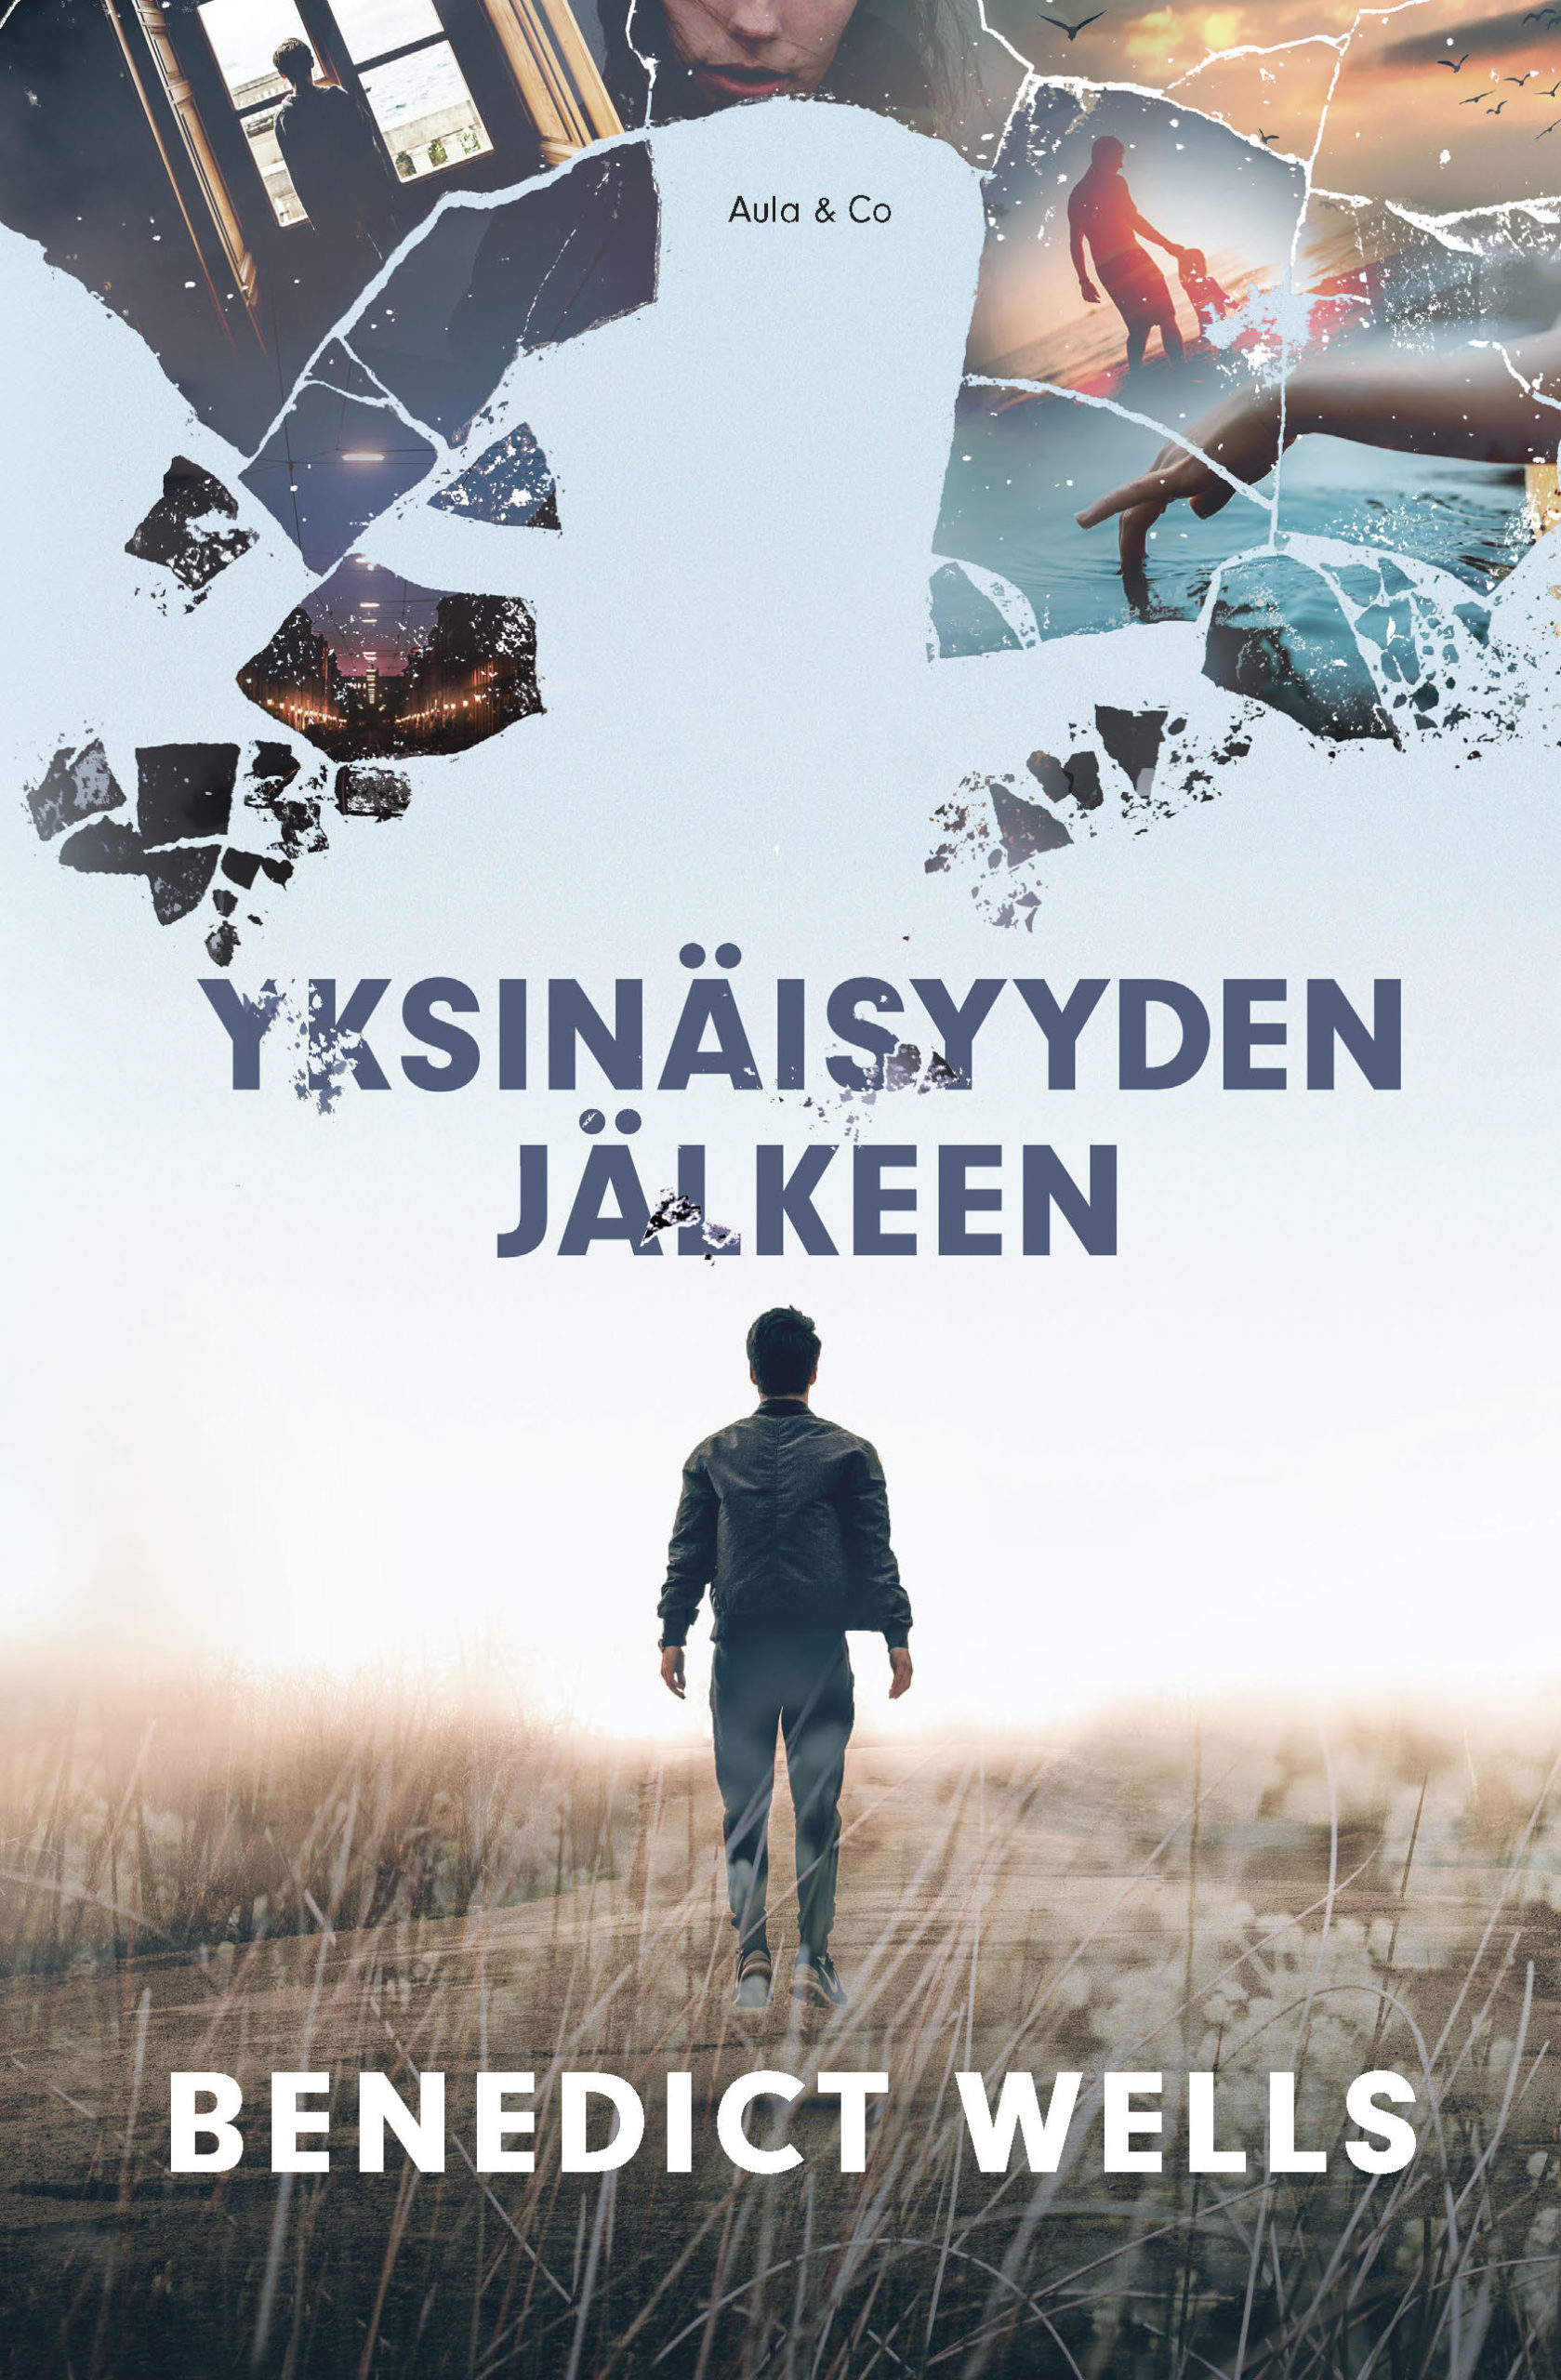 Now published in translation: The End of Loneliness in Finnish